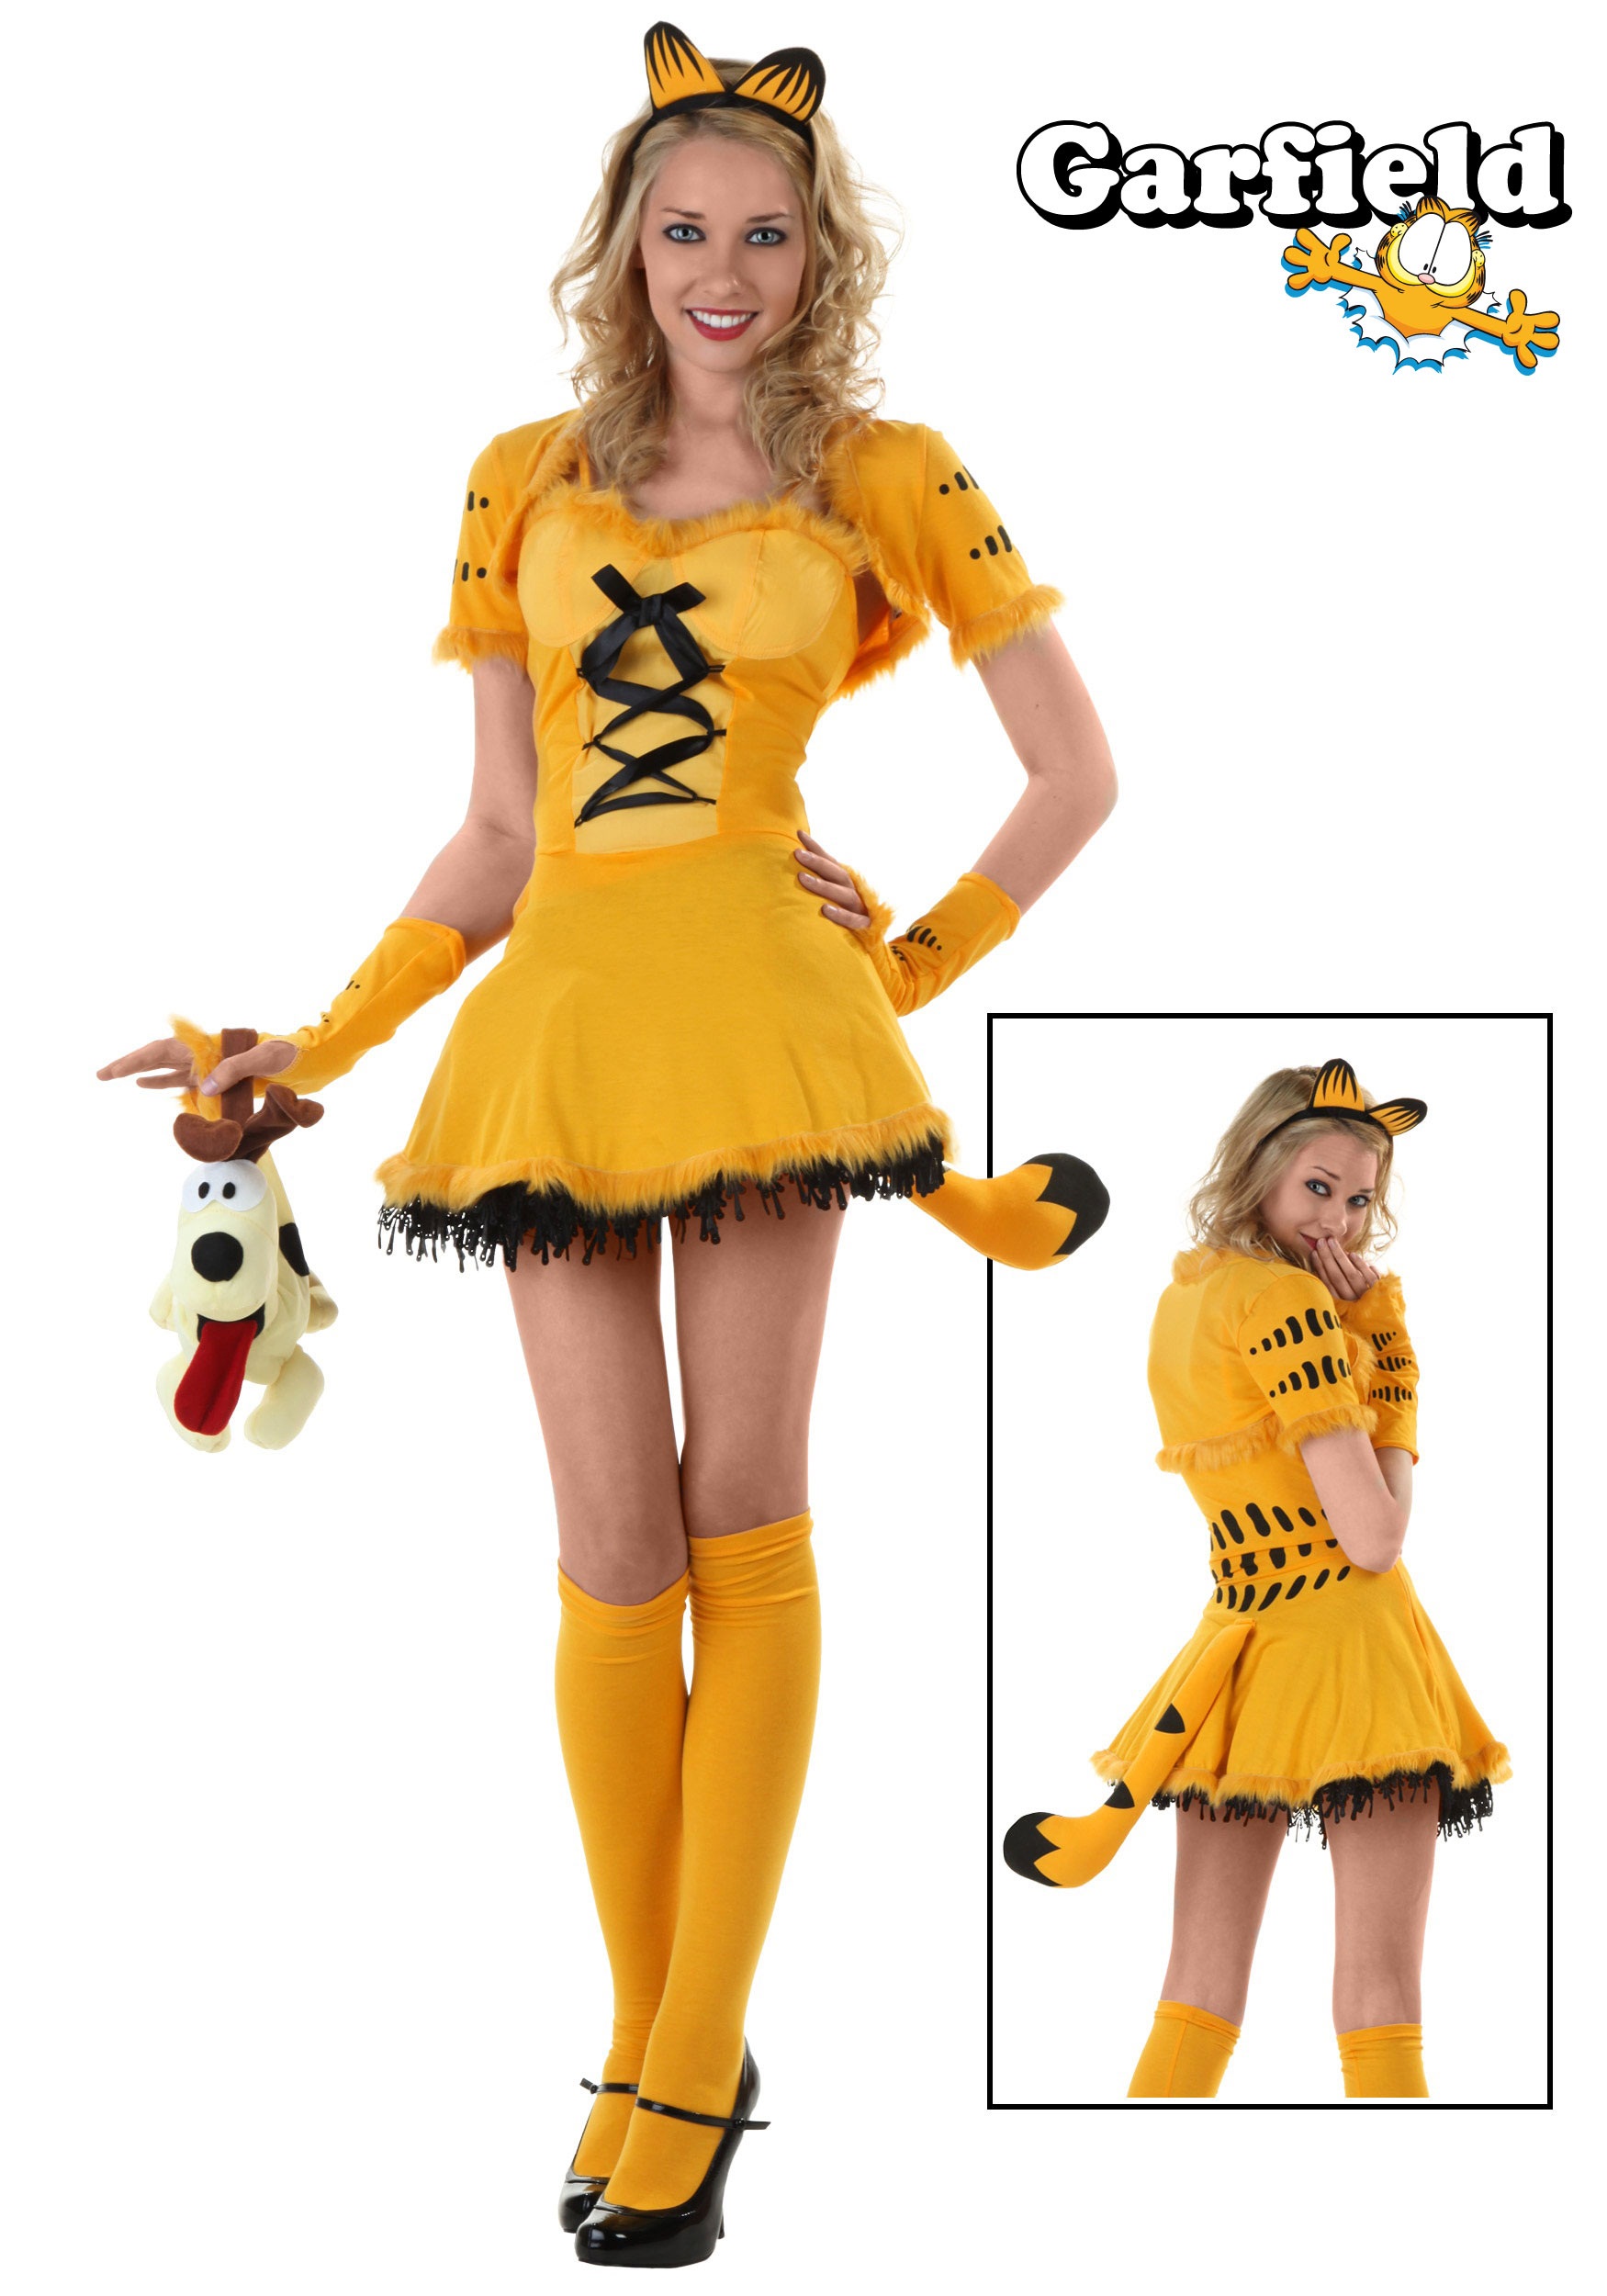 This Halloween, dress up as your favorite cartoon kitty Garfield in this Gi...